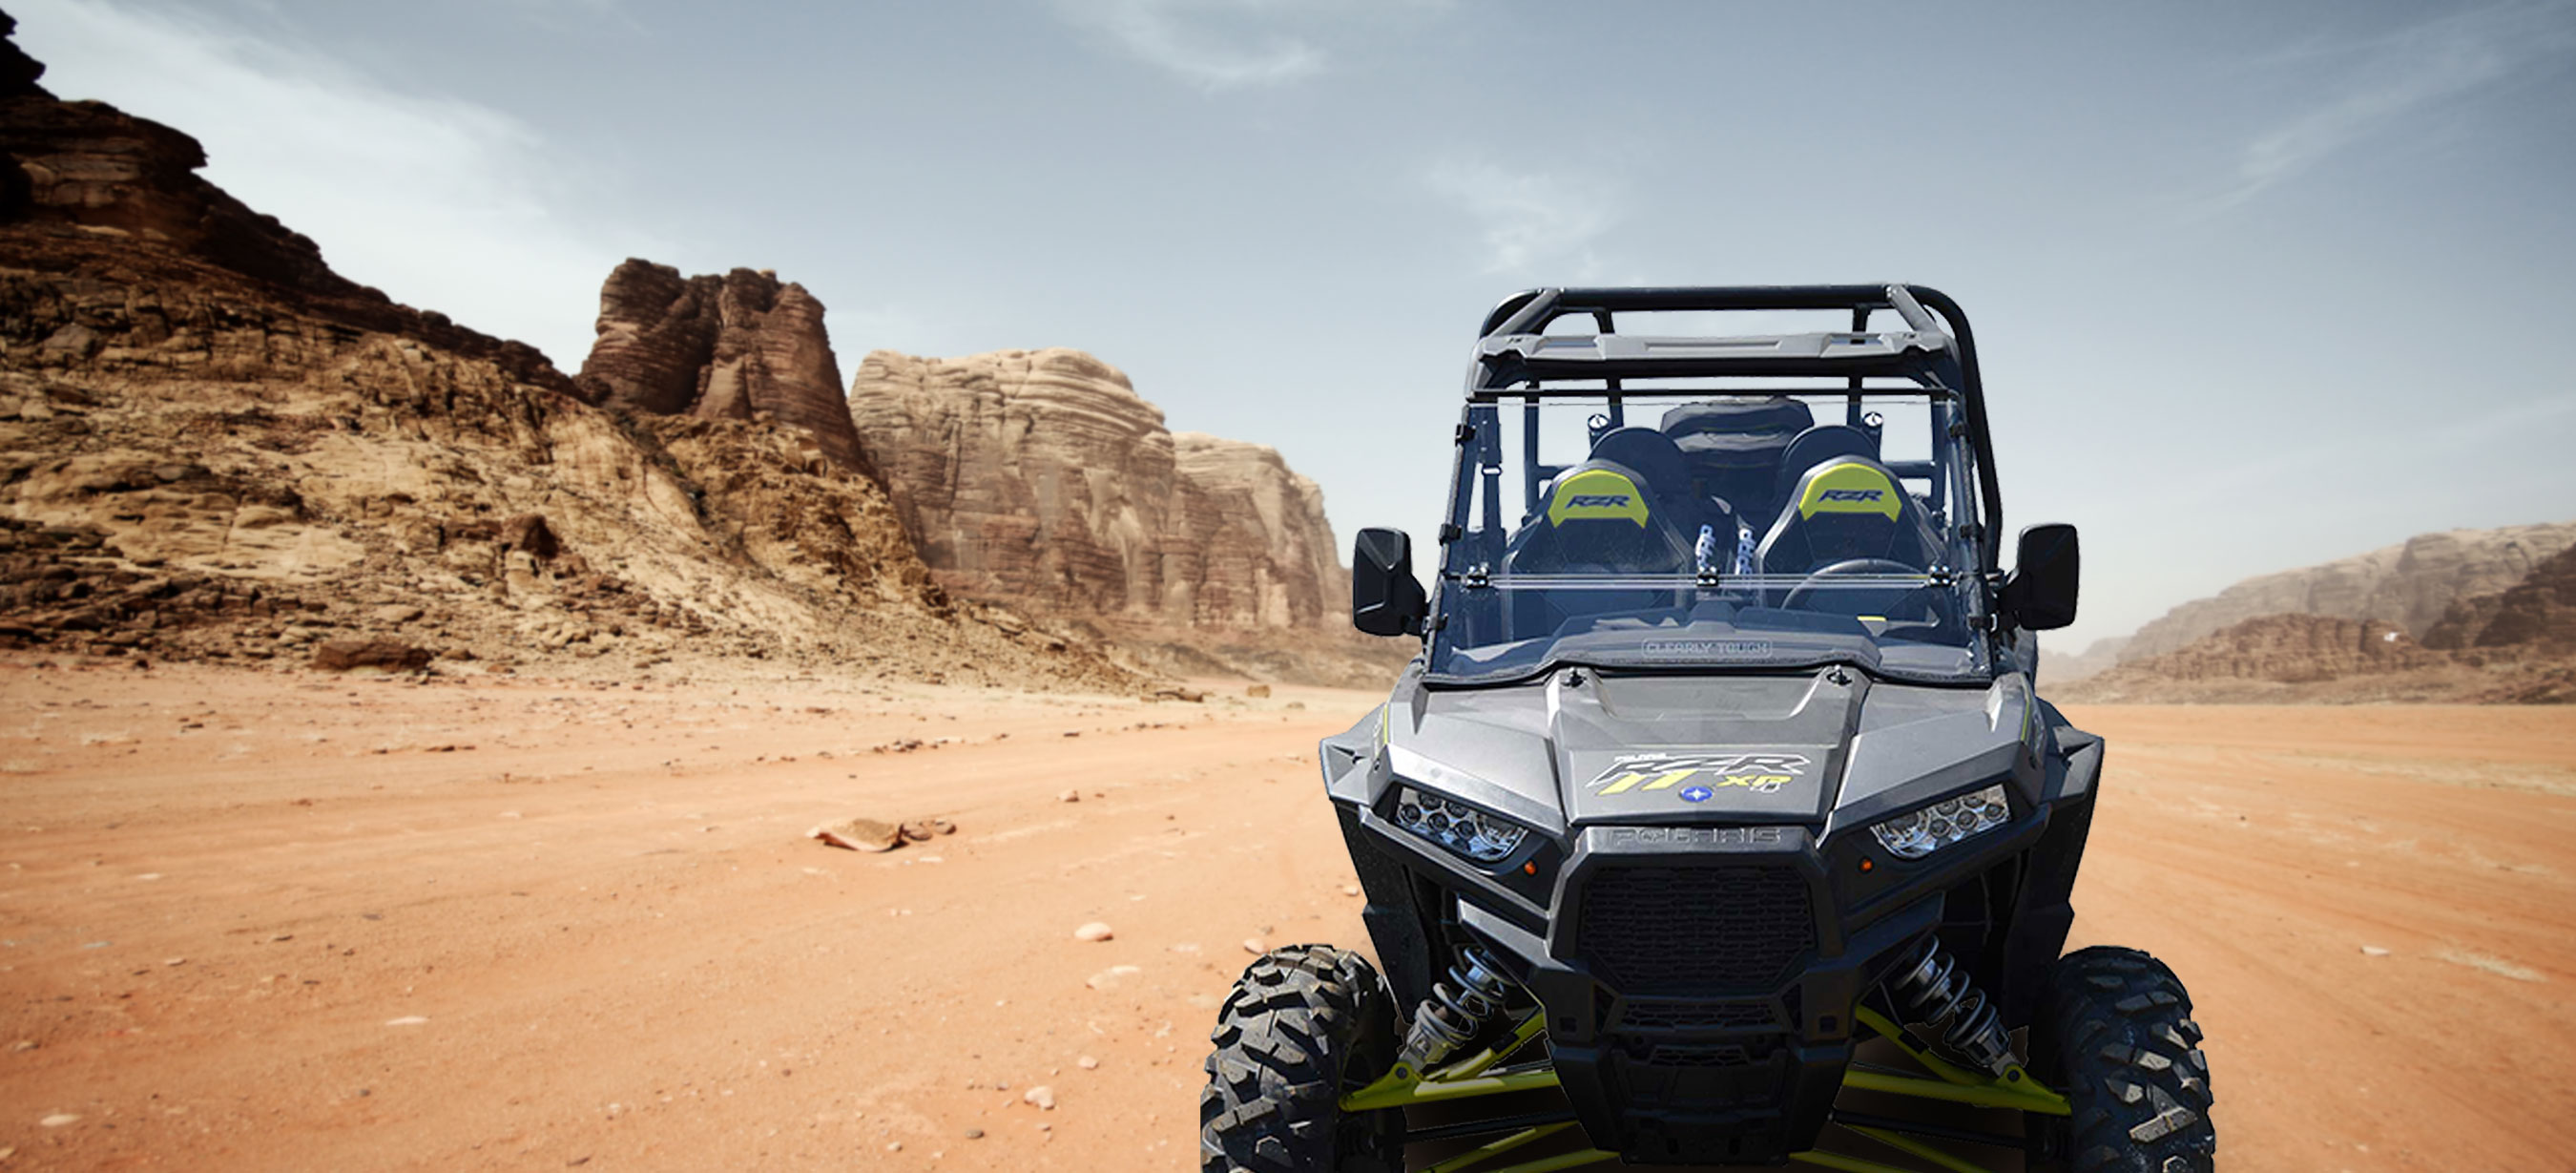 Clearly Tough Full Folding Windshield for the Polaris RZR 170 Scratch Resistant Made in America!! Premium Polycarbonate The Ultimate in Side by Side Versatility 